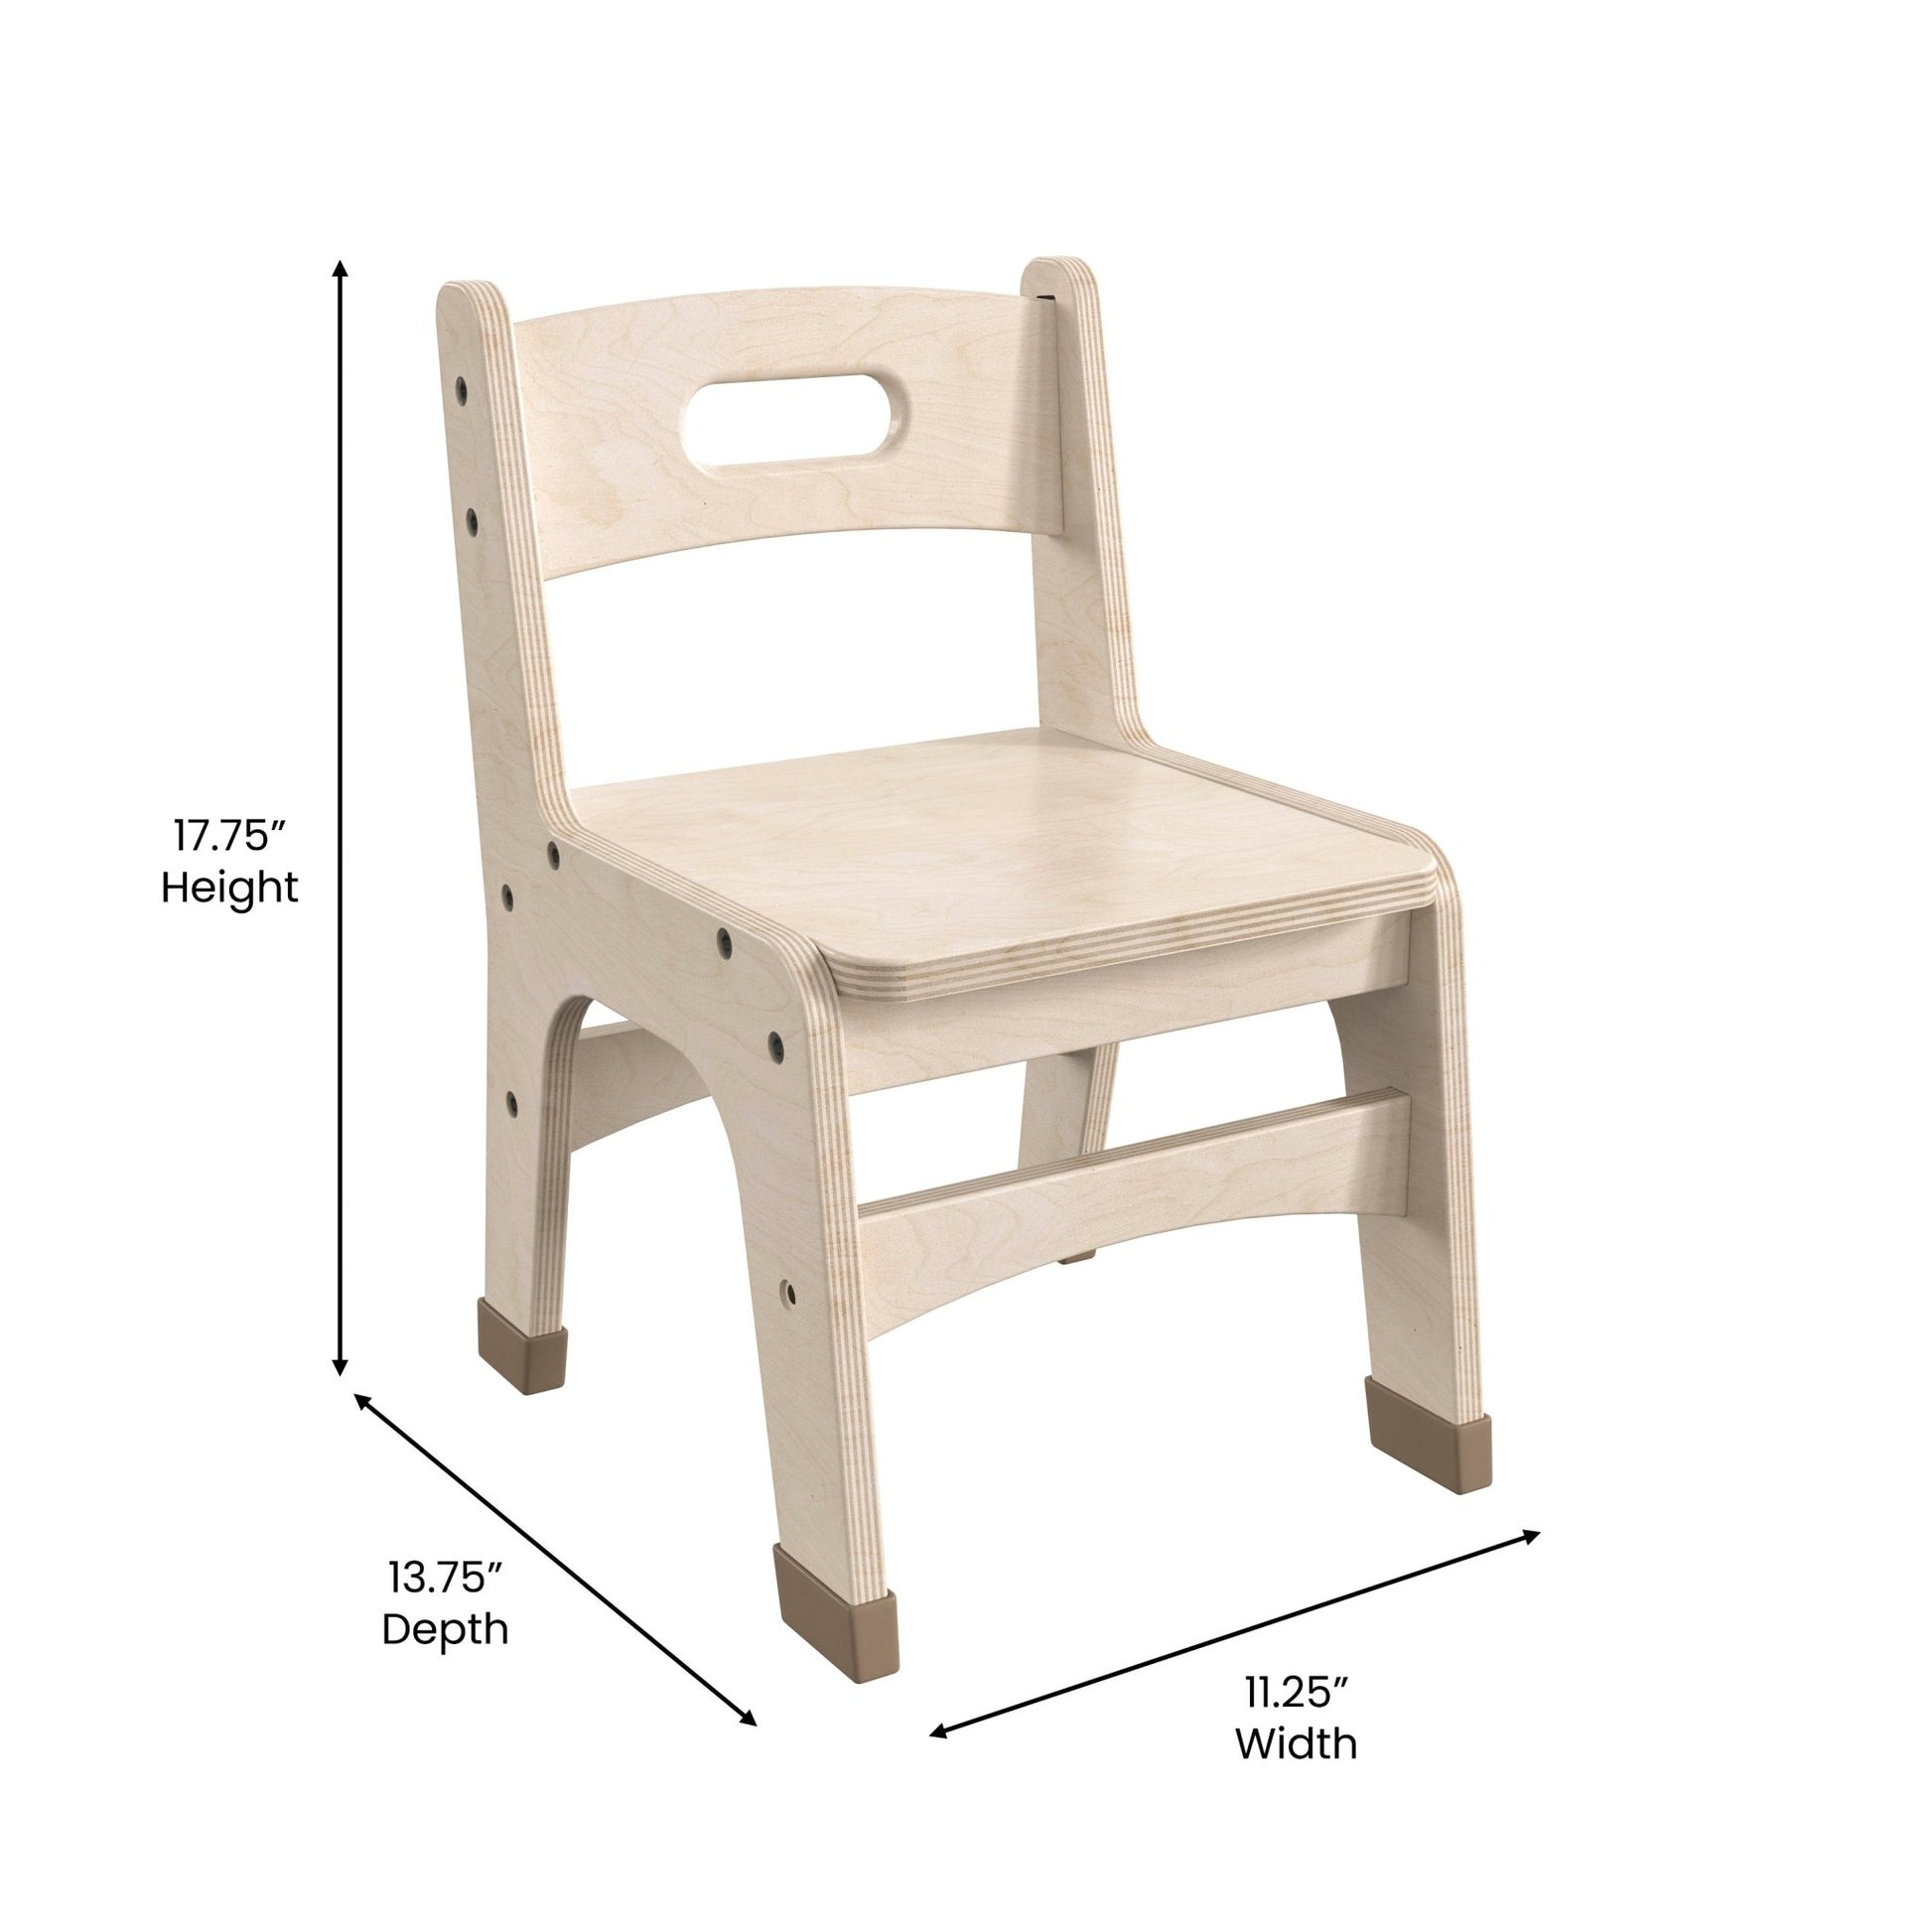 Bright Beginnings Set of 2 Commercial Grade Wooden Classroom Chairs, 10" Seat Height with Non-Slip Foot Caps and Built-In Carrying Handle, Natural - SchoolOutlet